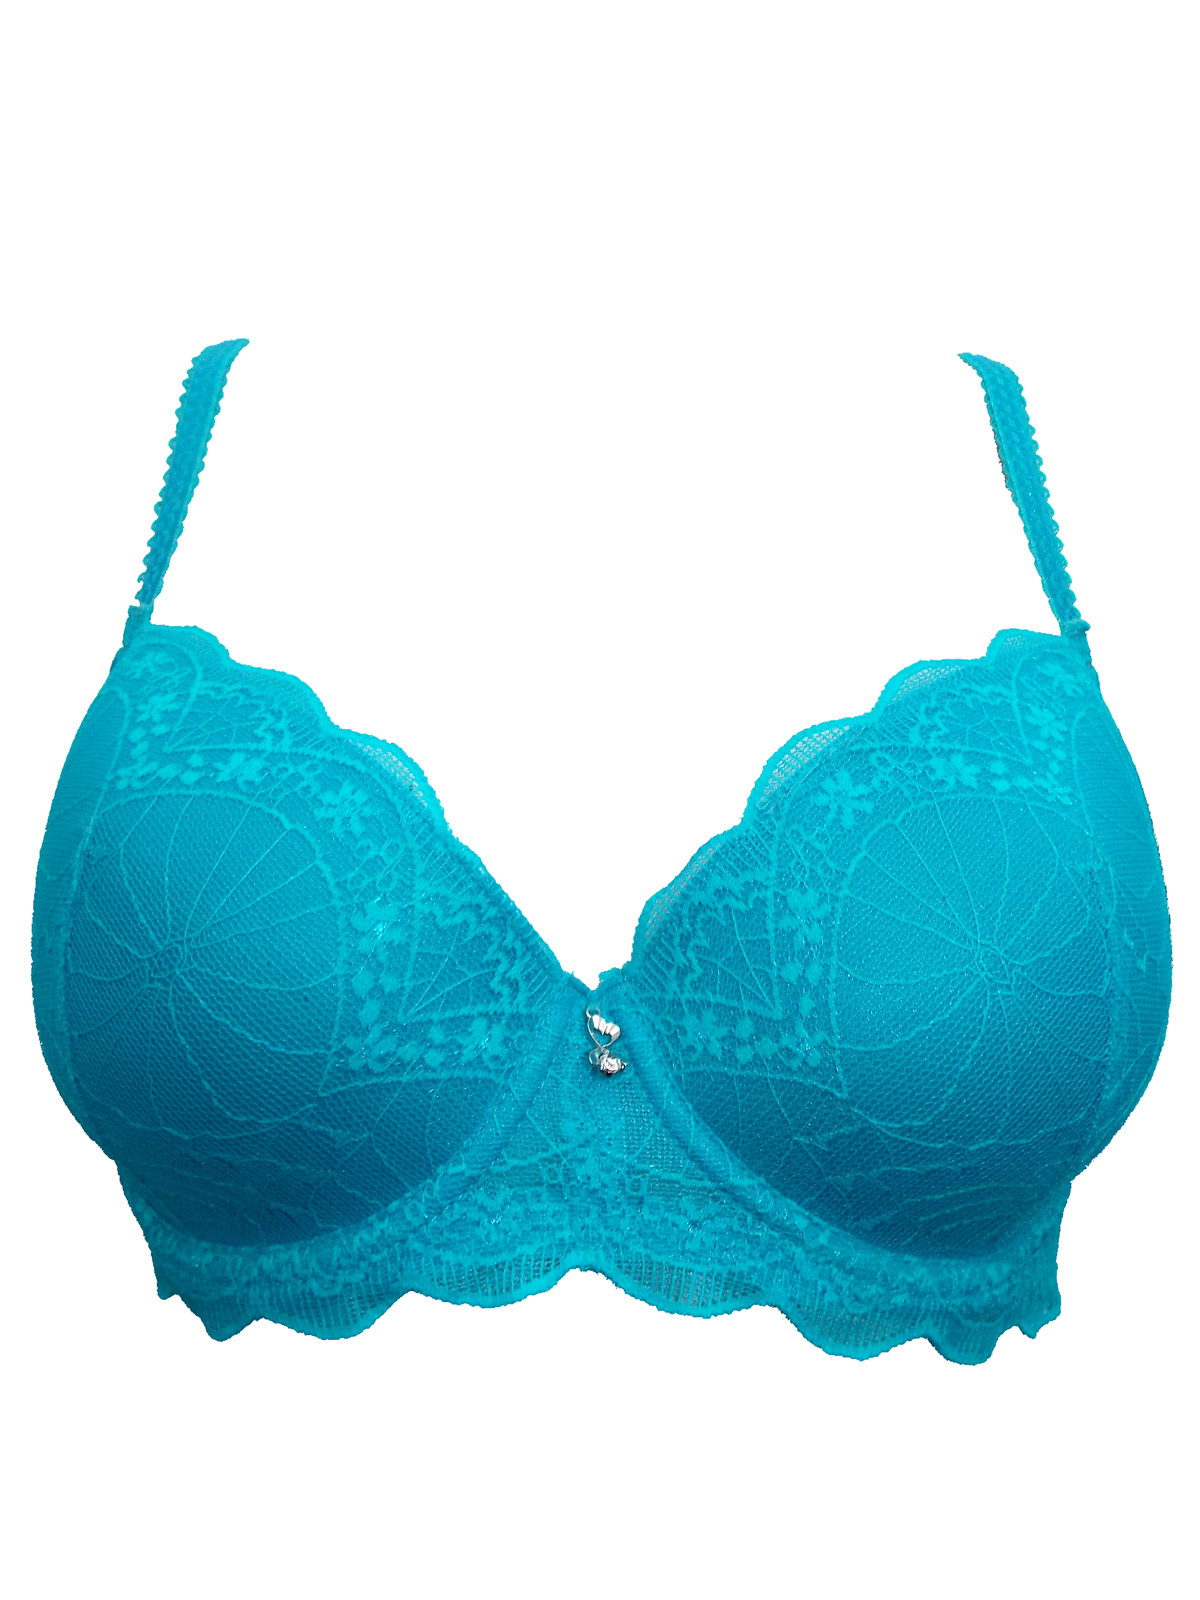 Cybele - - Cybele TURQUOISE Lace Overlay Underwired Padded Bra - Size 36 to  42 (A-B-C-D-F)